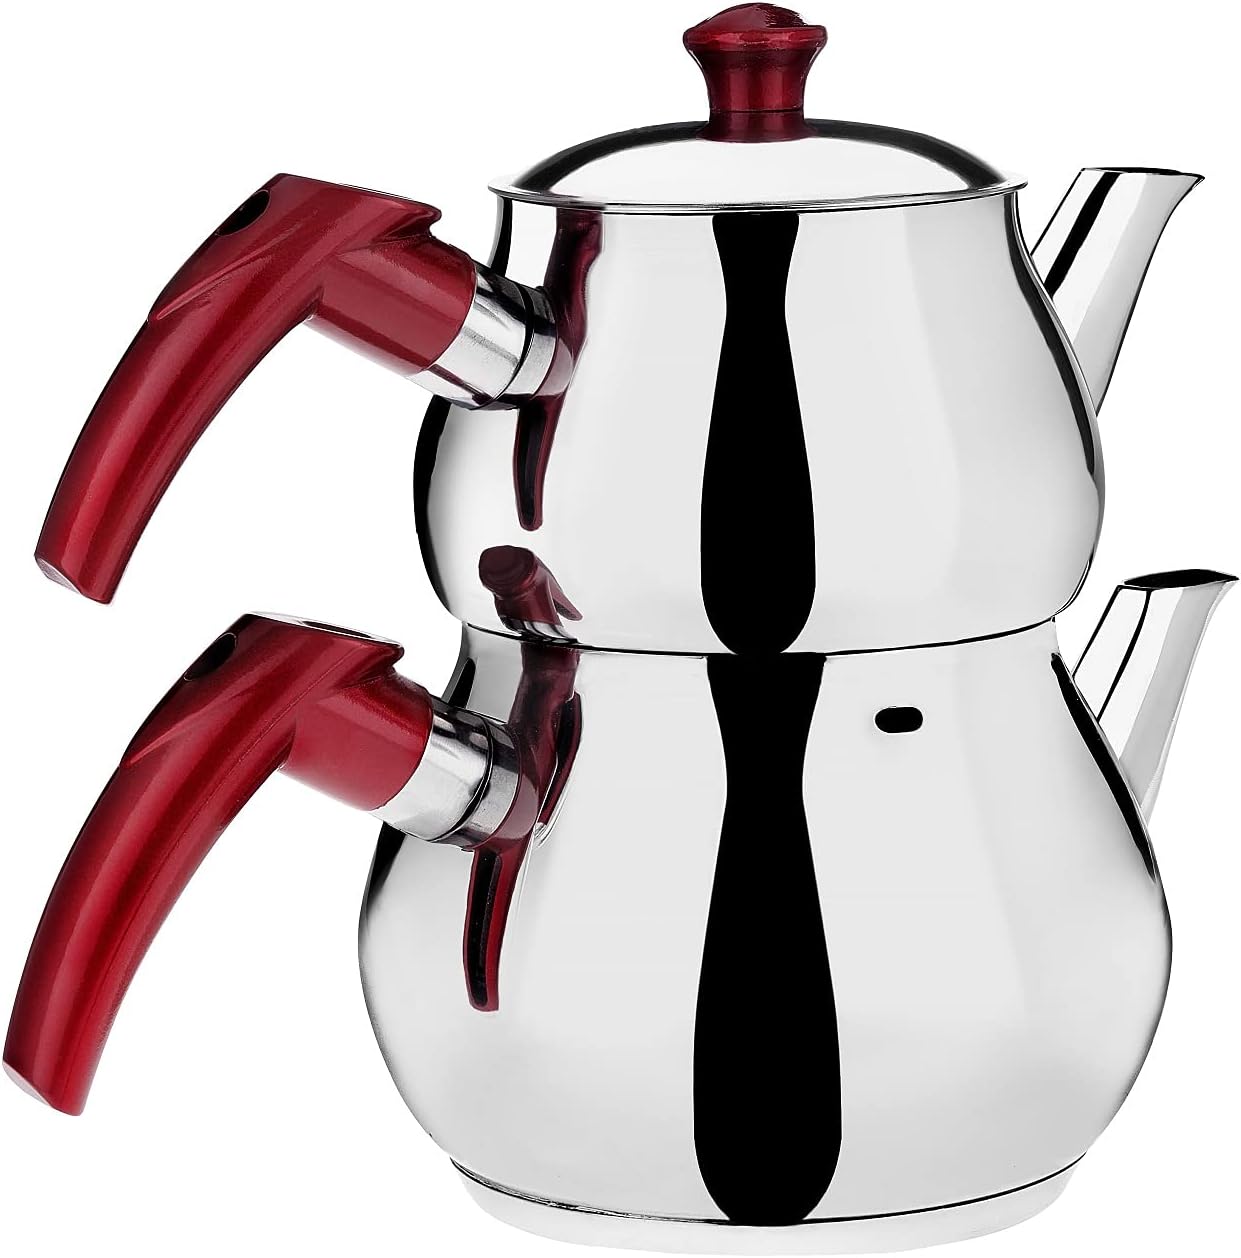 Destalya Turkish Teapot Set, Stainless Steel Double Teapots For Stove Top Tea Maker With Handle Samowar Style Self-Stressed Teapot Kettle Water Warmer Caydanlik (Midi Red)